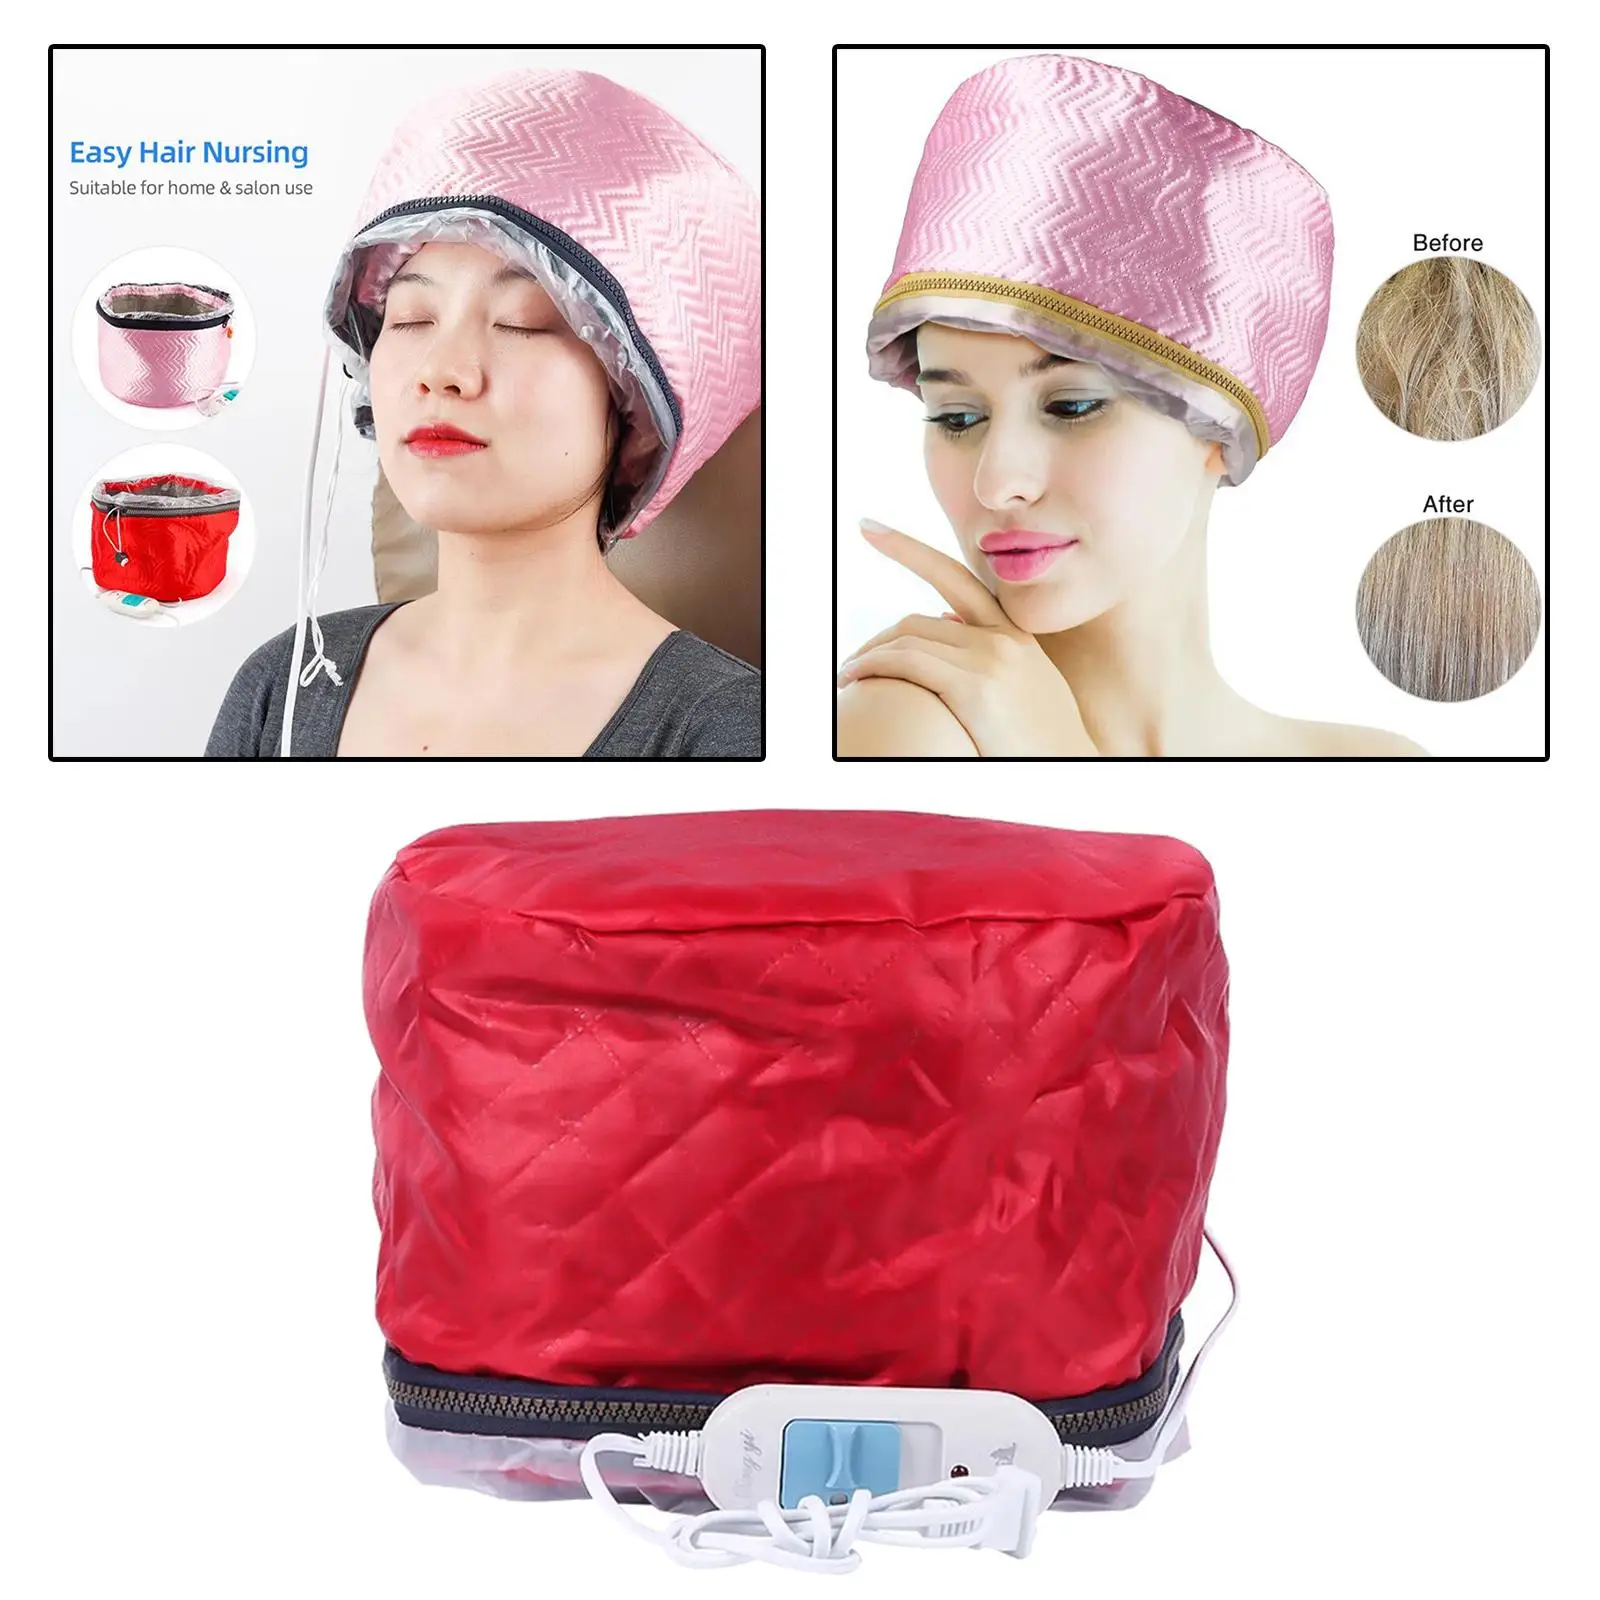 Hair Heating Caps Steamer 3-Modes Safe Household Red Hair Steamer for Deep Conditioning Home Salon Nourishing Hot Head Care SPA